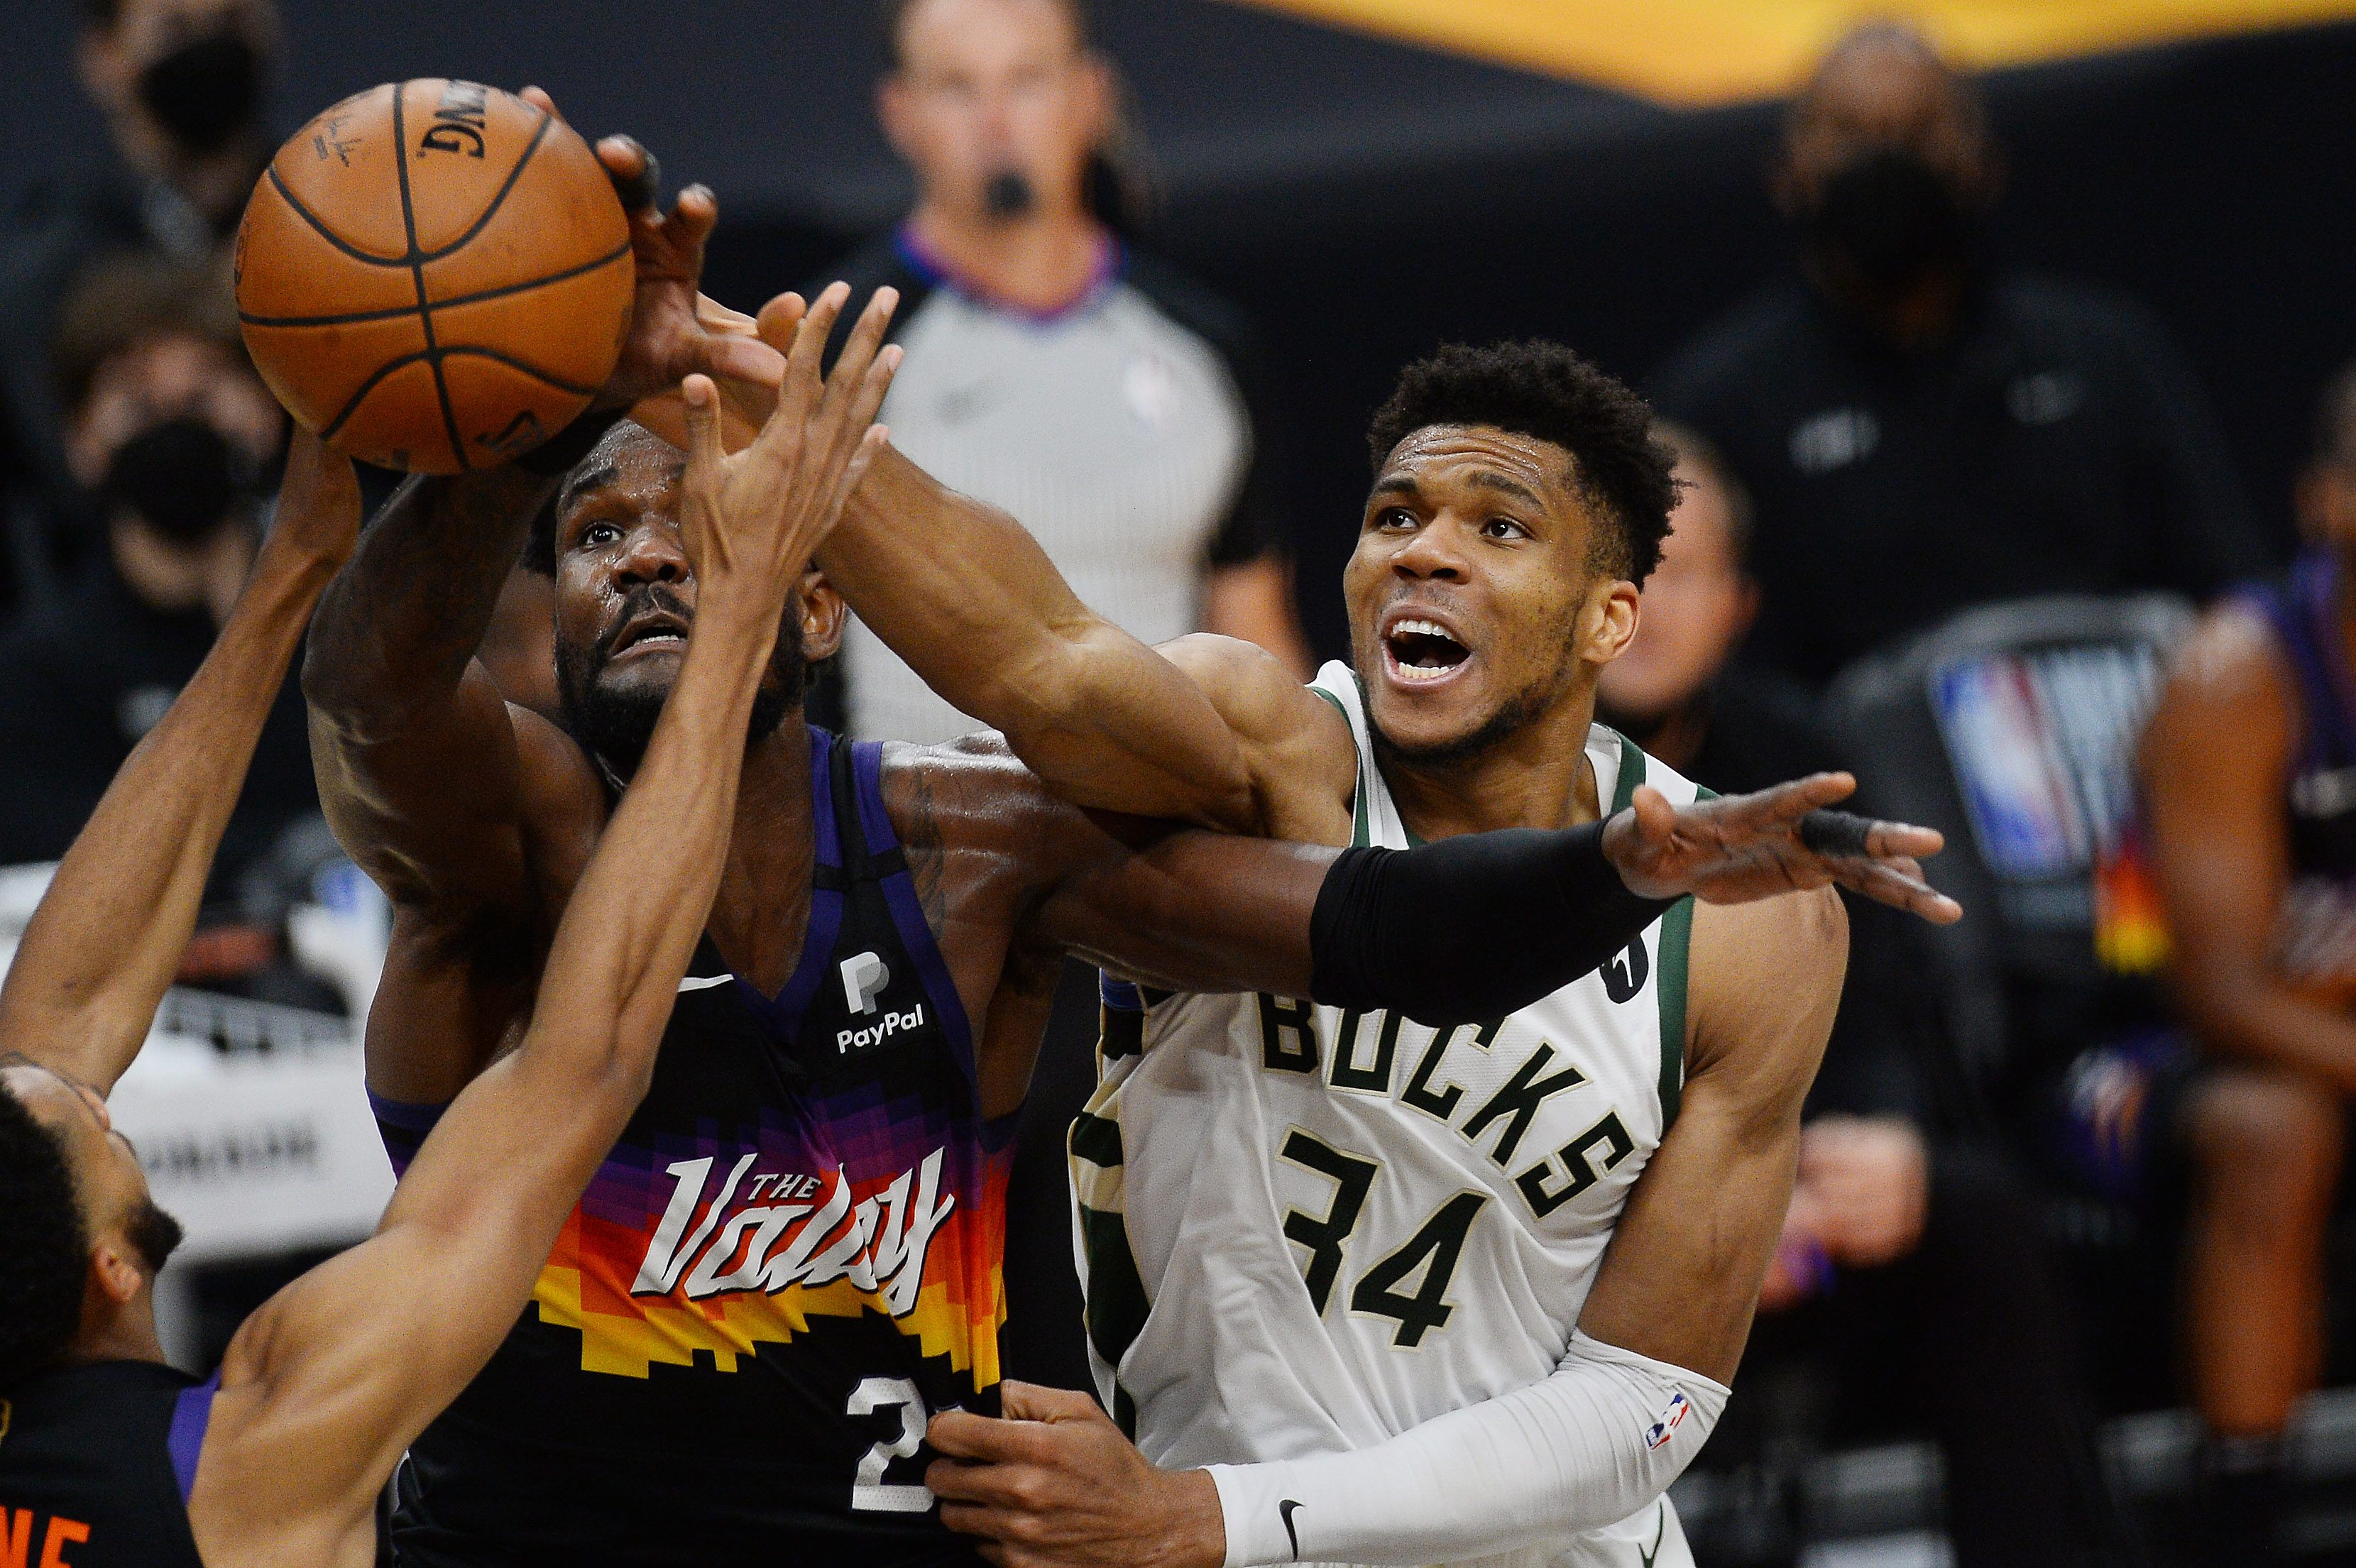 How some key counters helped the Bucks take Game 5 on the road